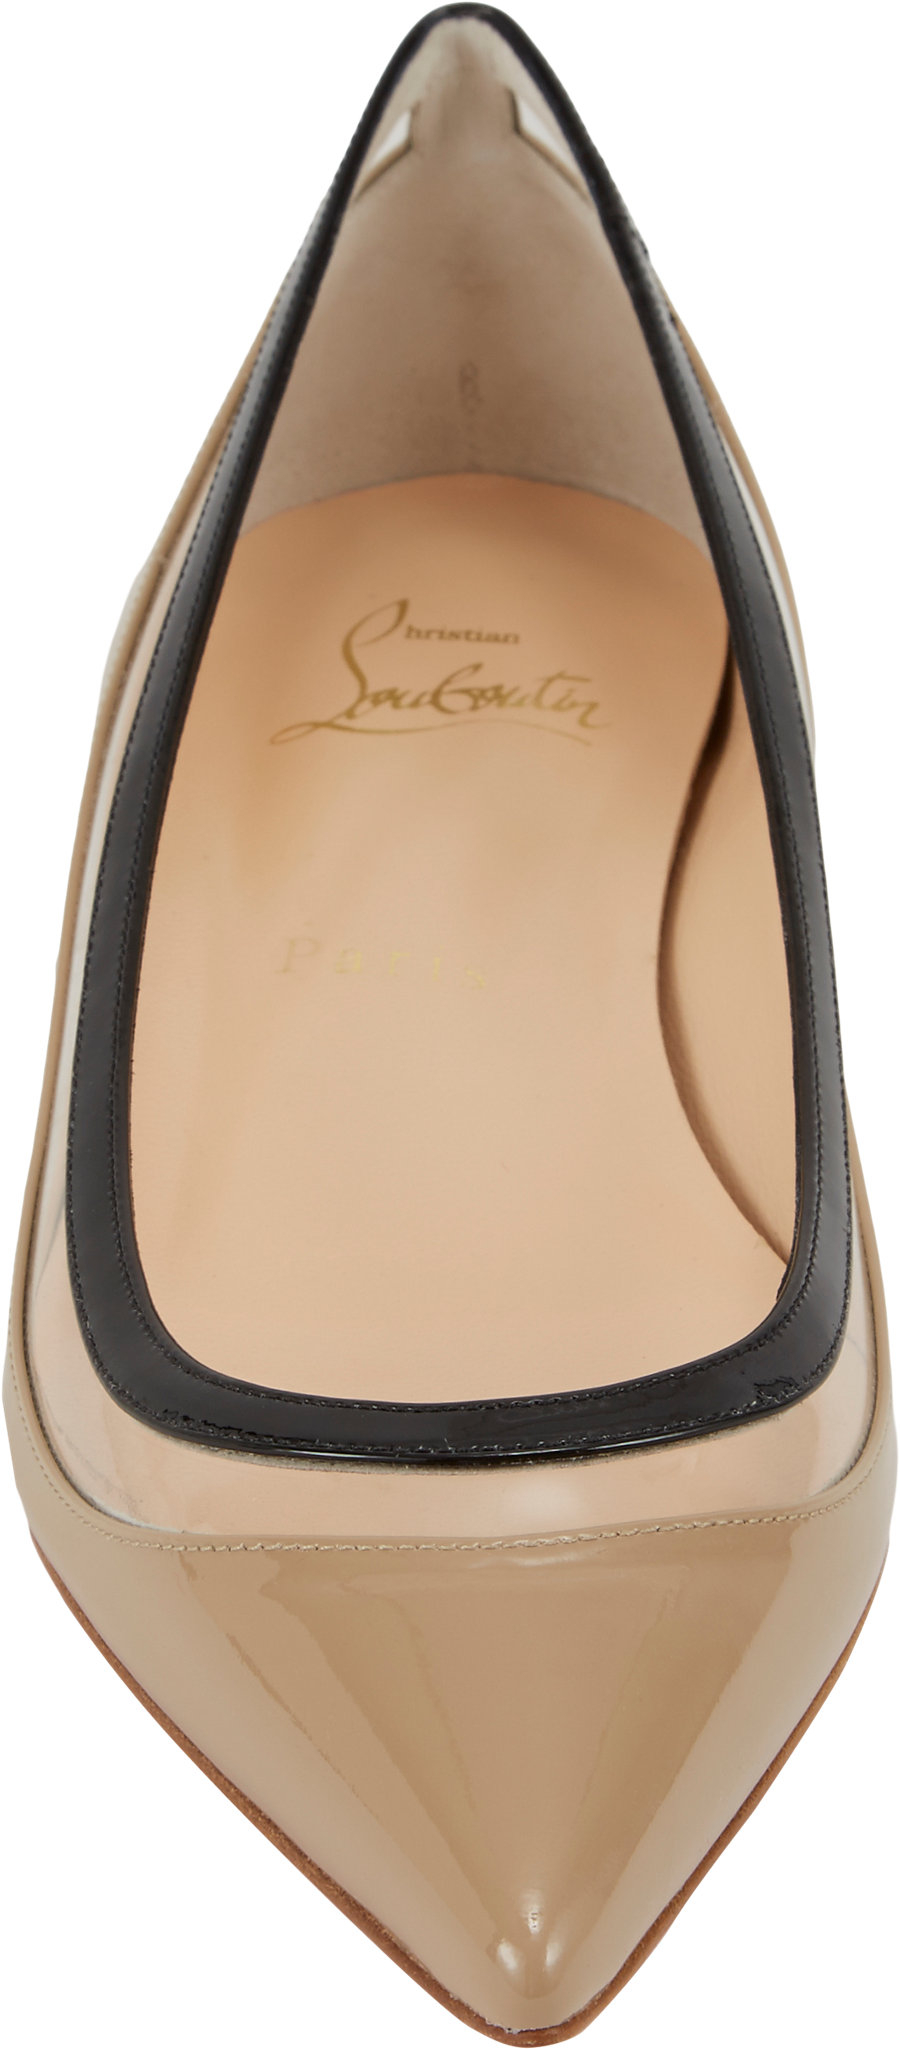 louboutin replica shoes - christian louboutin pointed-toe flats Nude and black | cosmetics ...